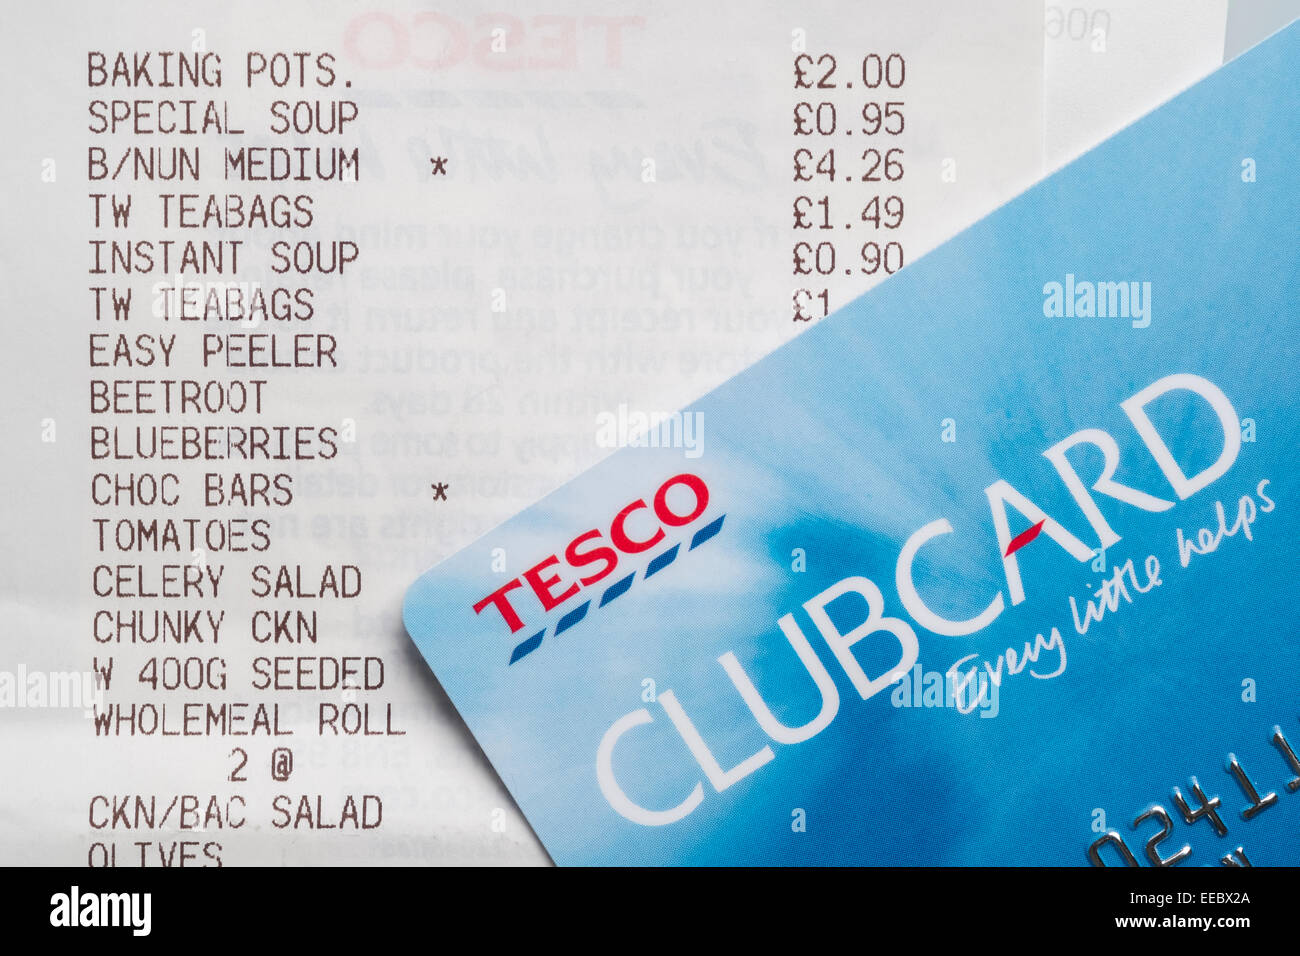 Tesco Clubcard used to collect loyalty points from grocery purchase items. Stock Photo